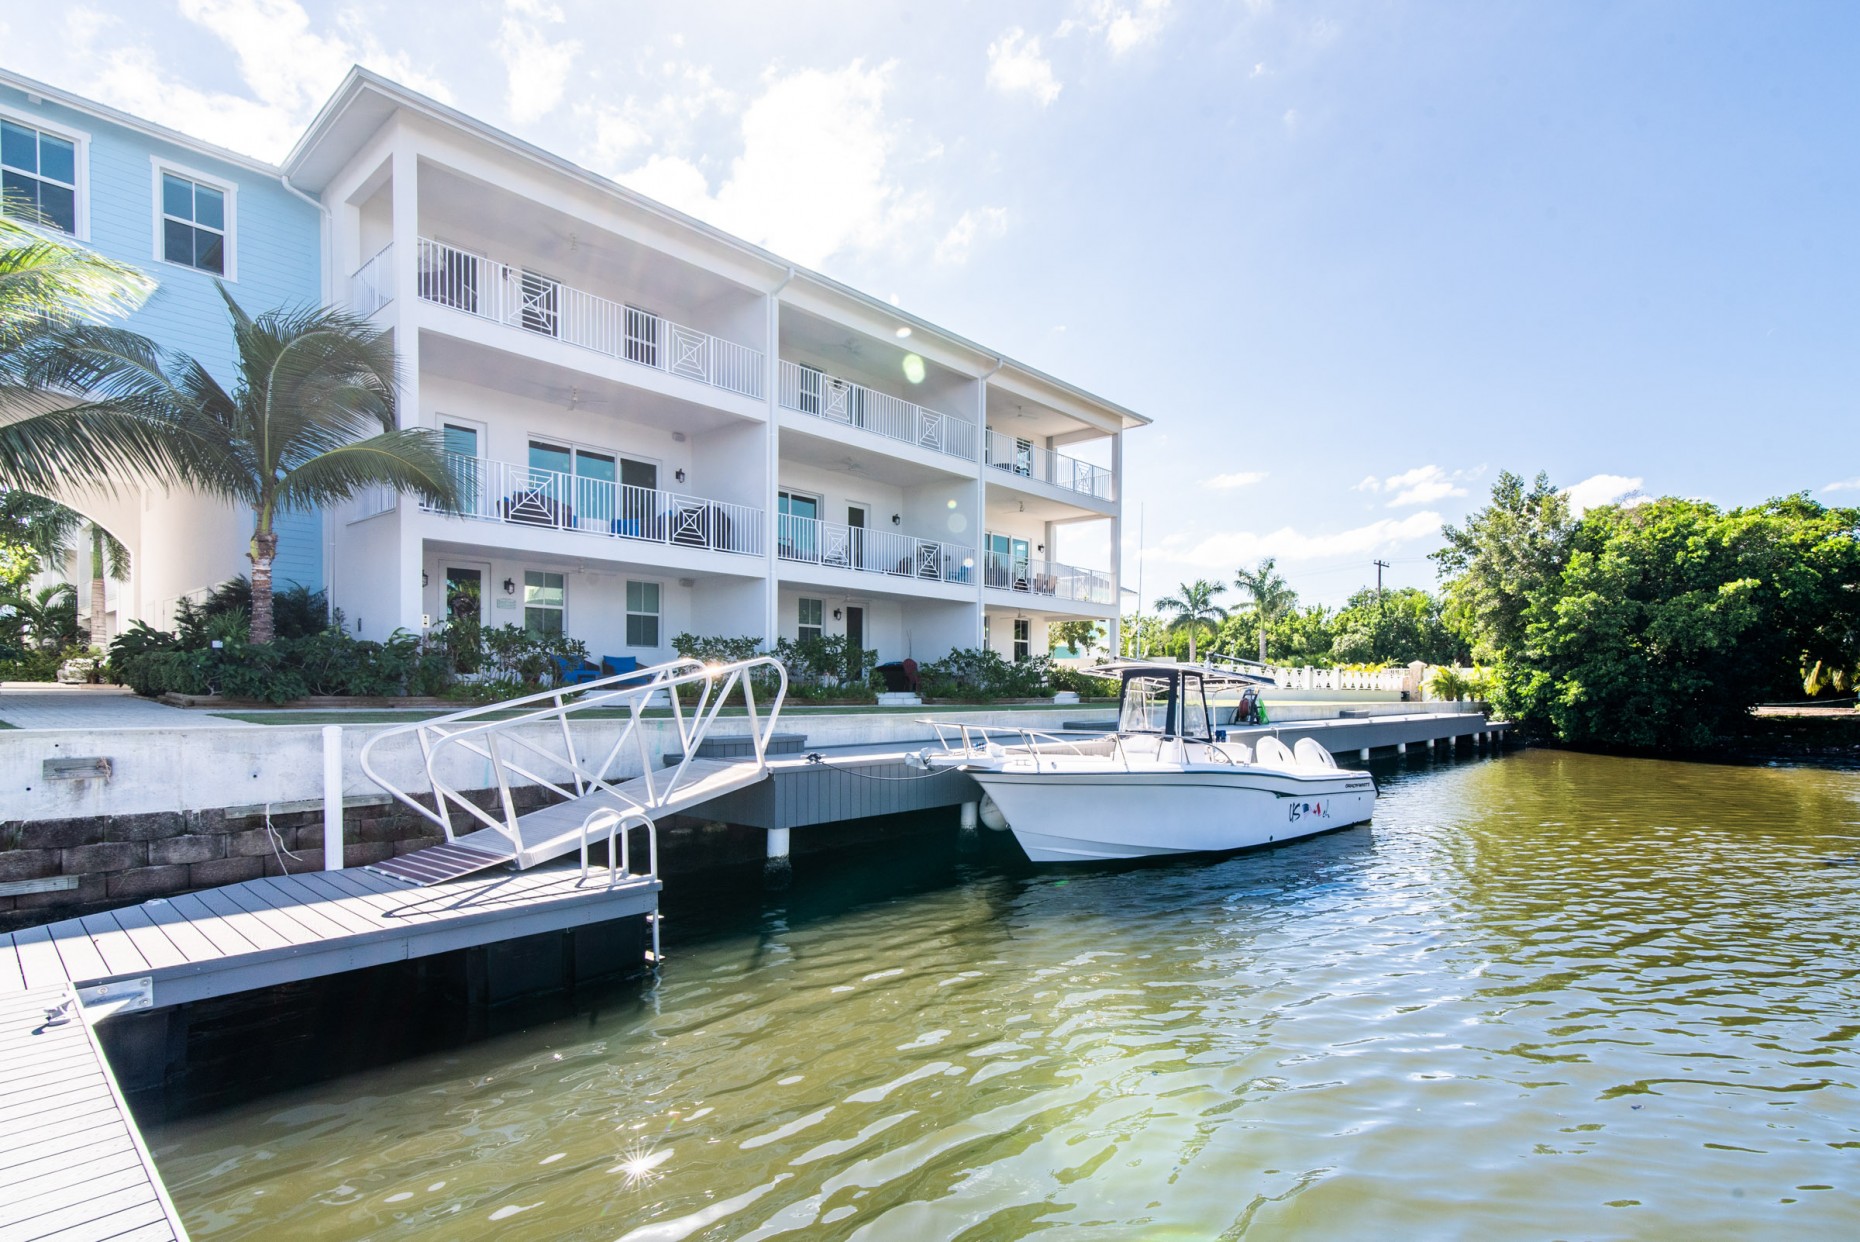 Waterfront Home at Periwinkle II with Serviced Dock